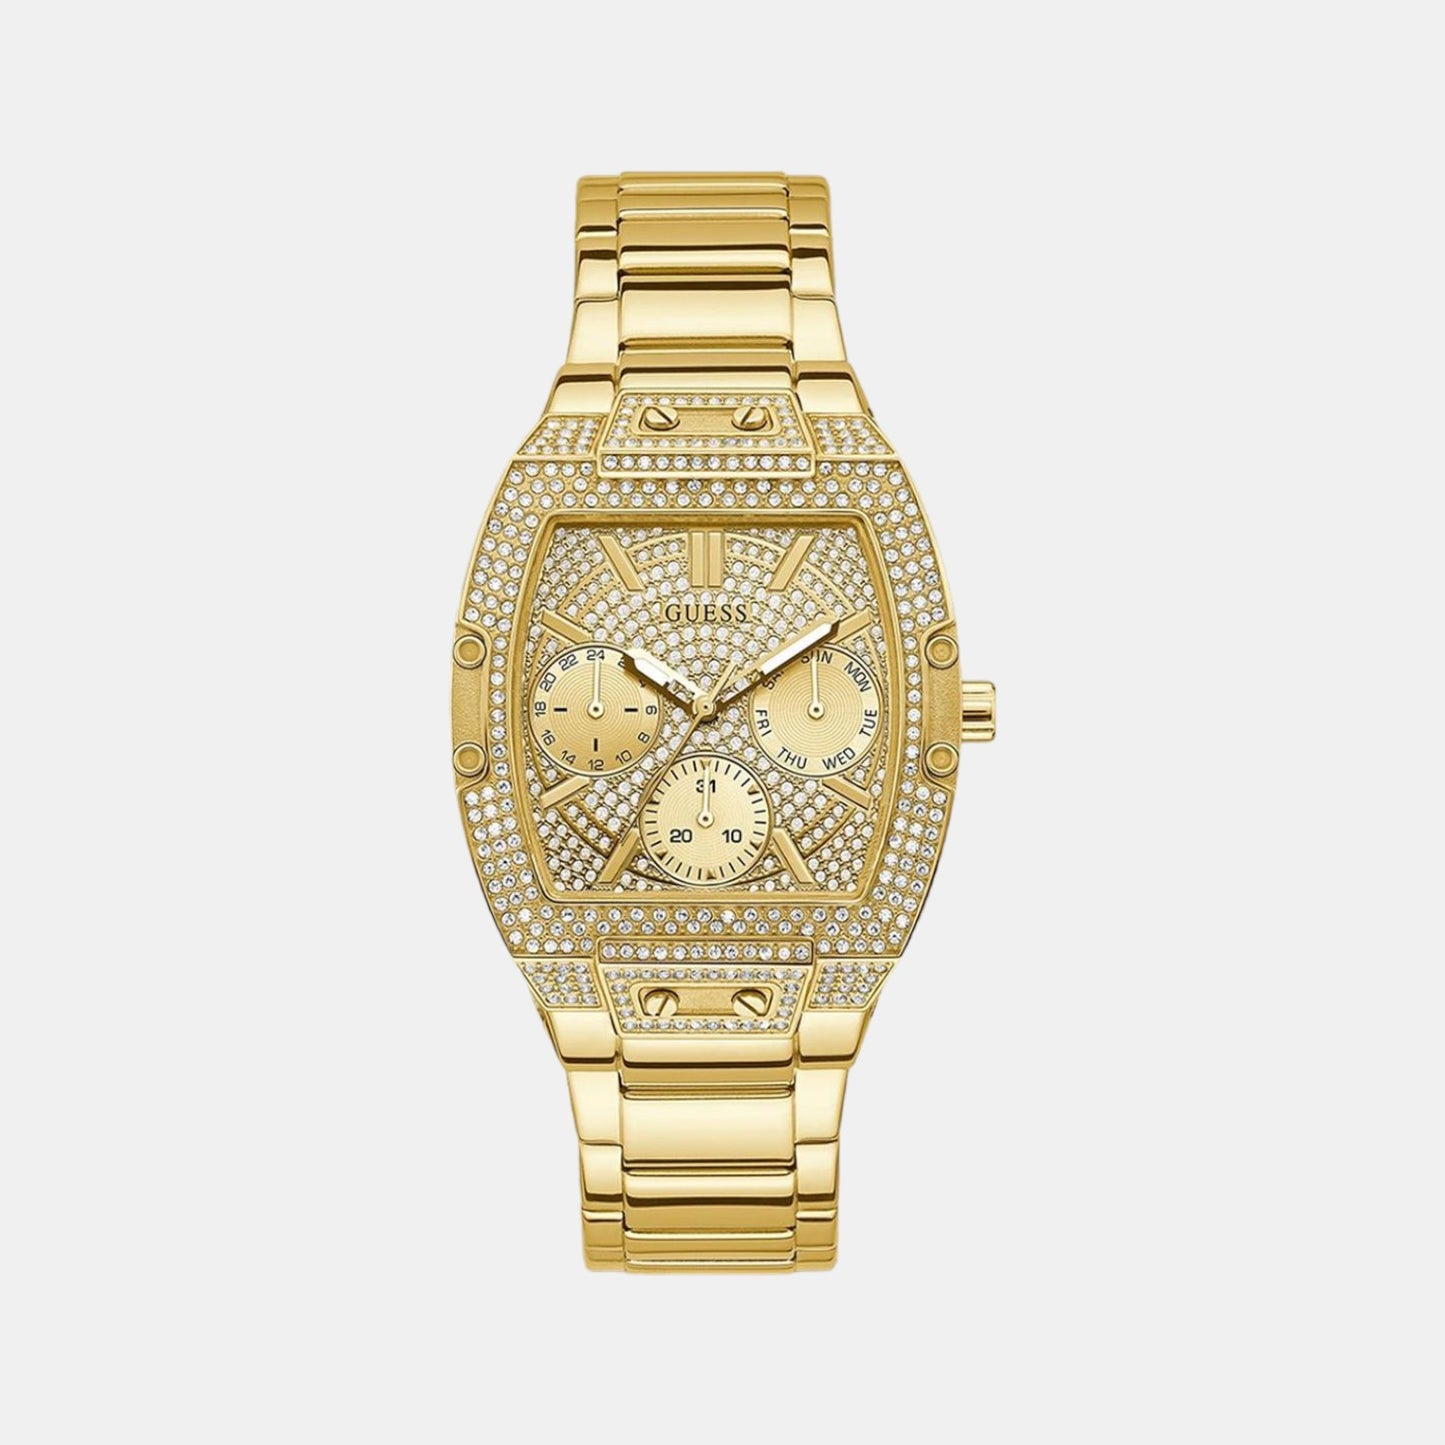 Female Gold Stainless Steel Chronograph Watch GW0104L2